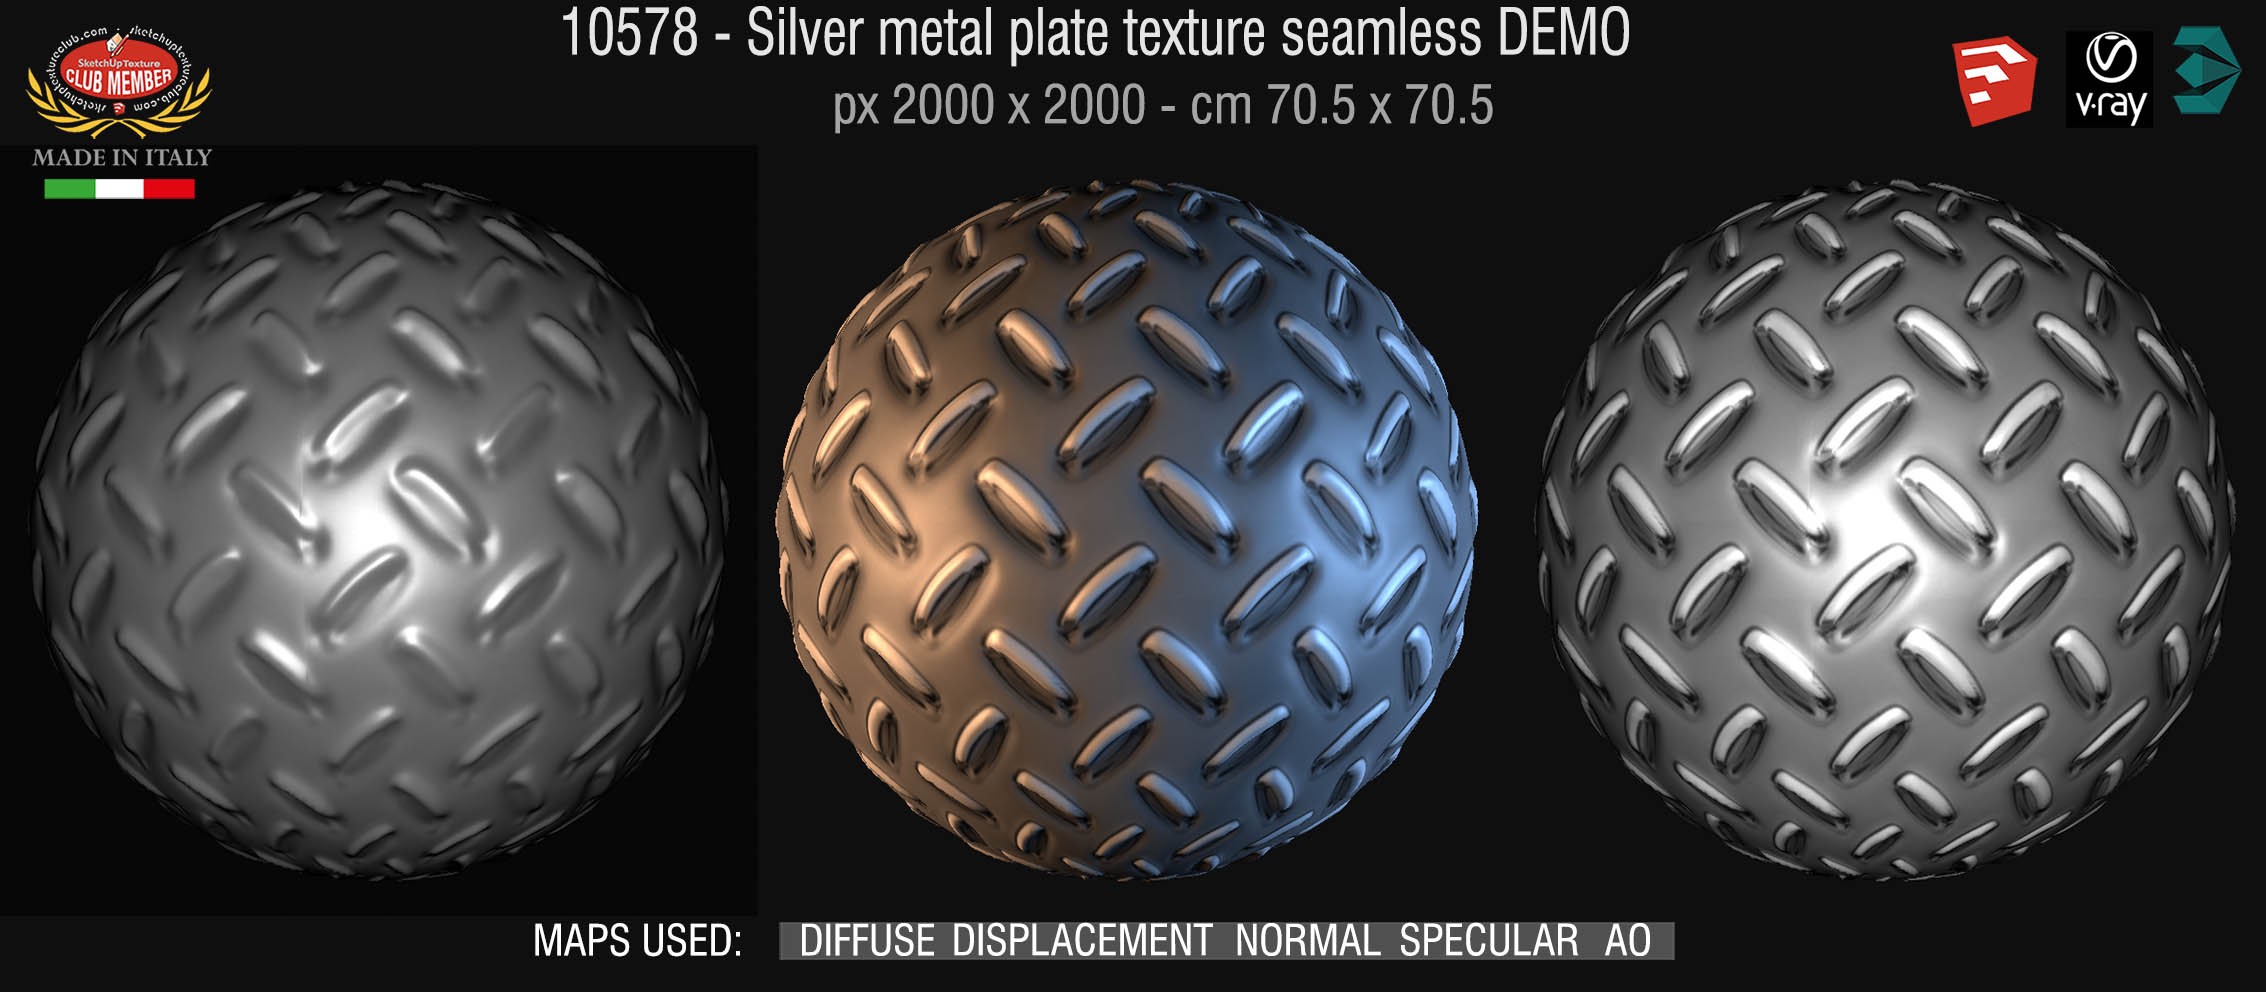 10578 HR Silver metal plate texture seamless + maps DEMO